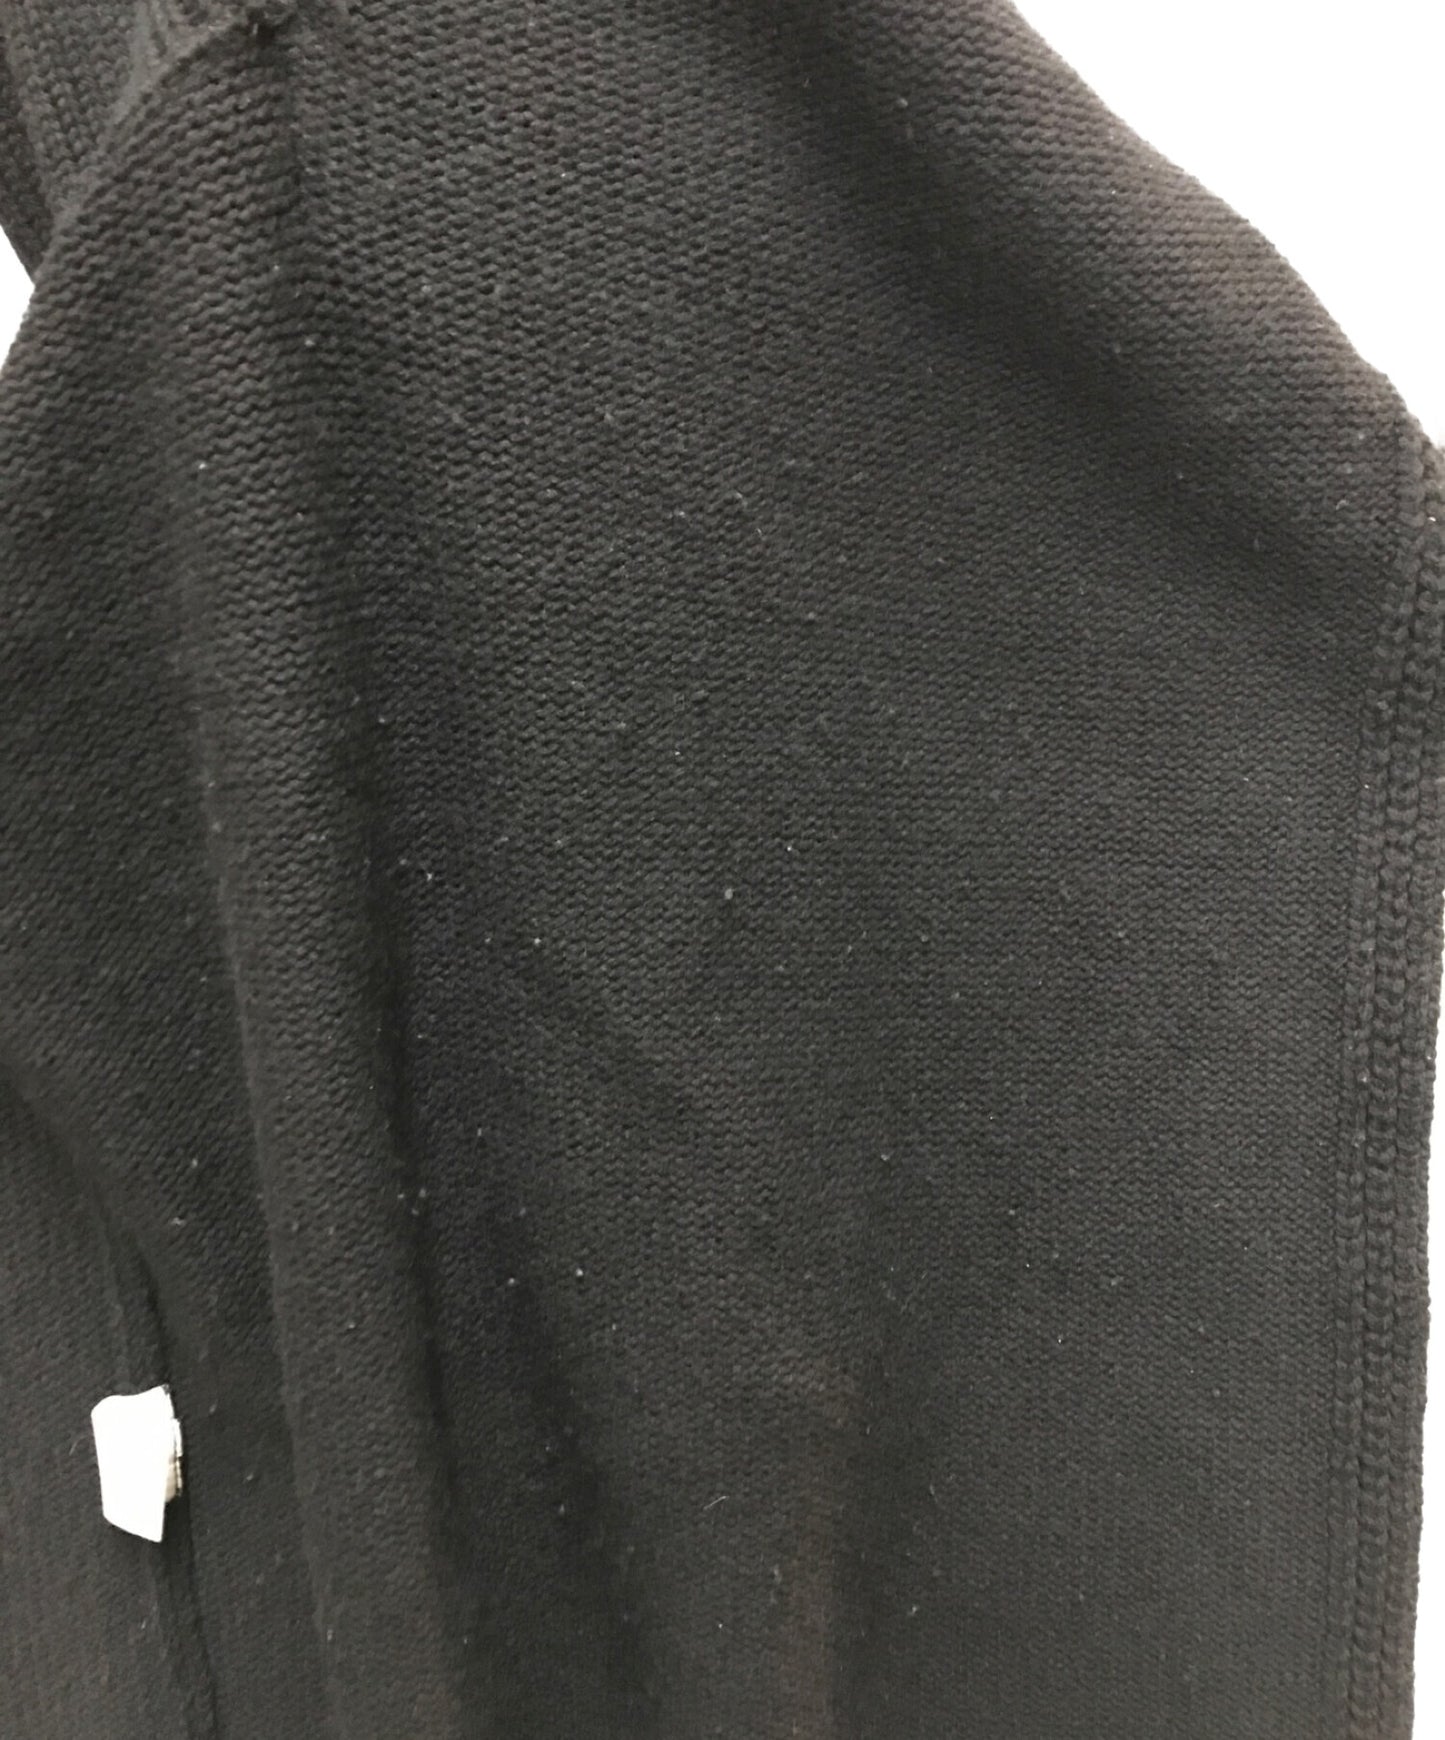 [Pre-owned] TAKAHIROMIYASHITA TheSoloIst. two face sweater 0020AW19